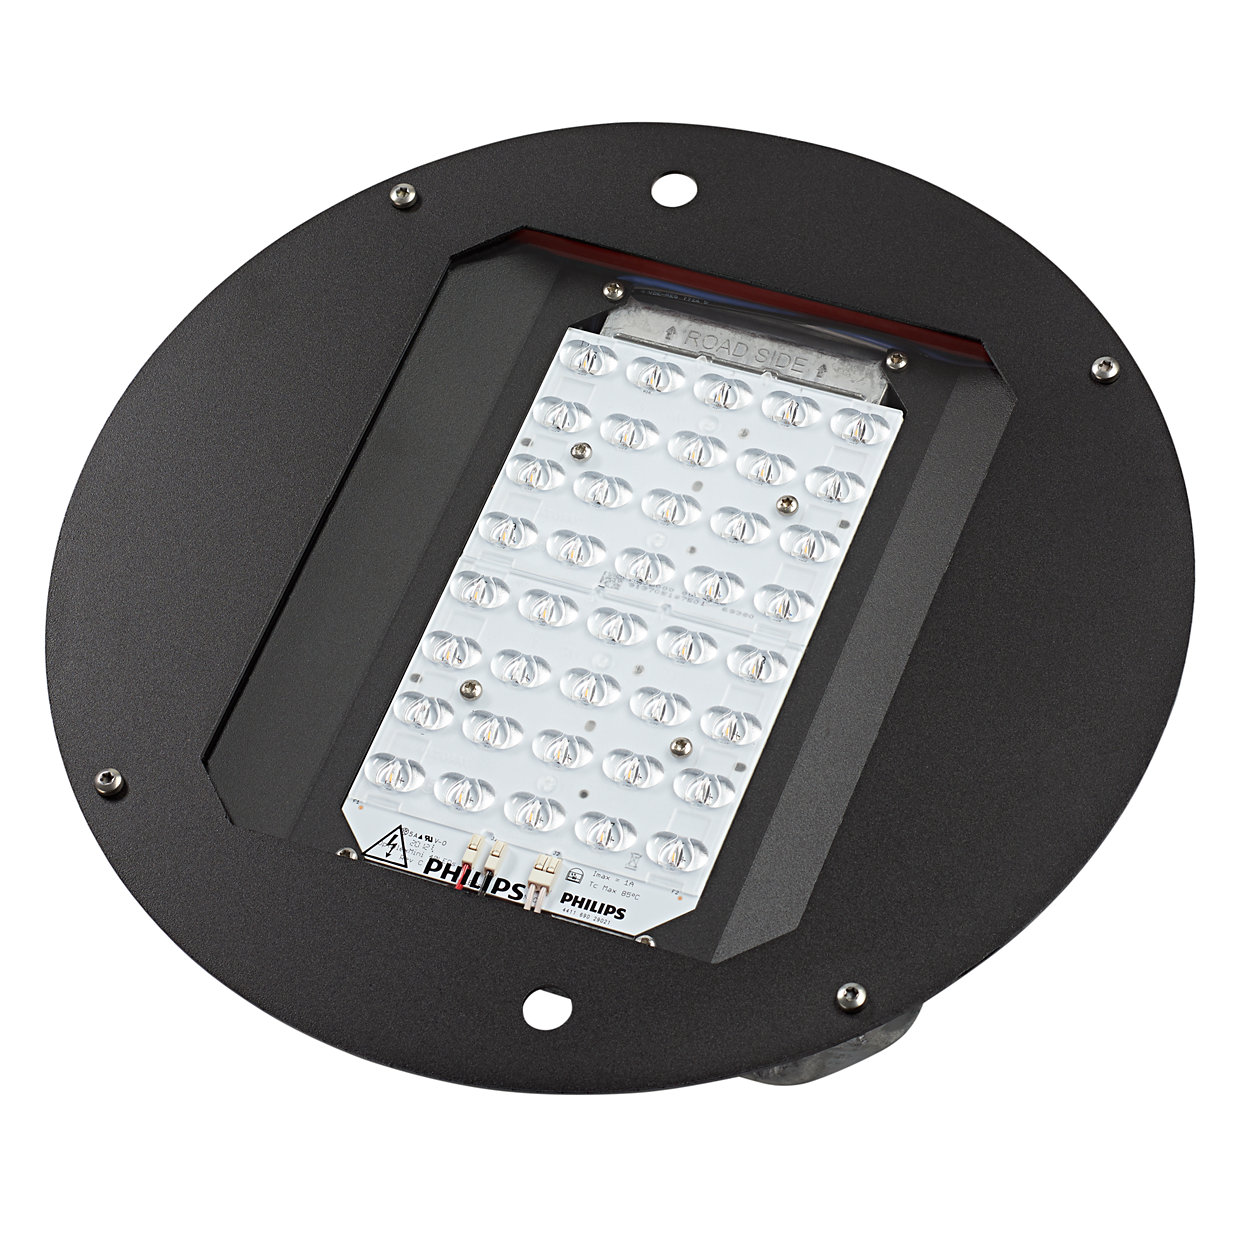 Upgrading your traditional luminaire installation base to a more energy-efficient, future-proof LED alternative.